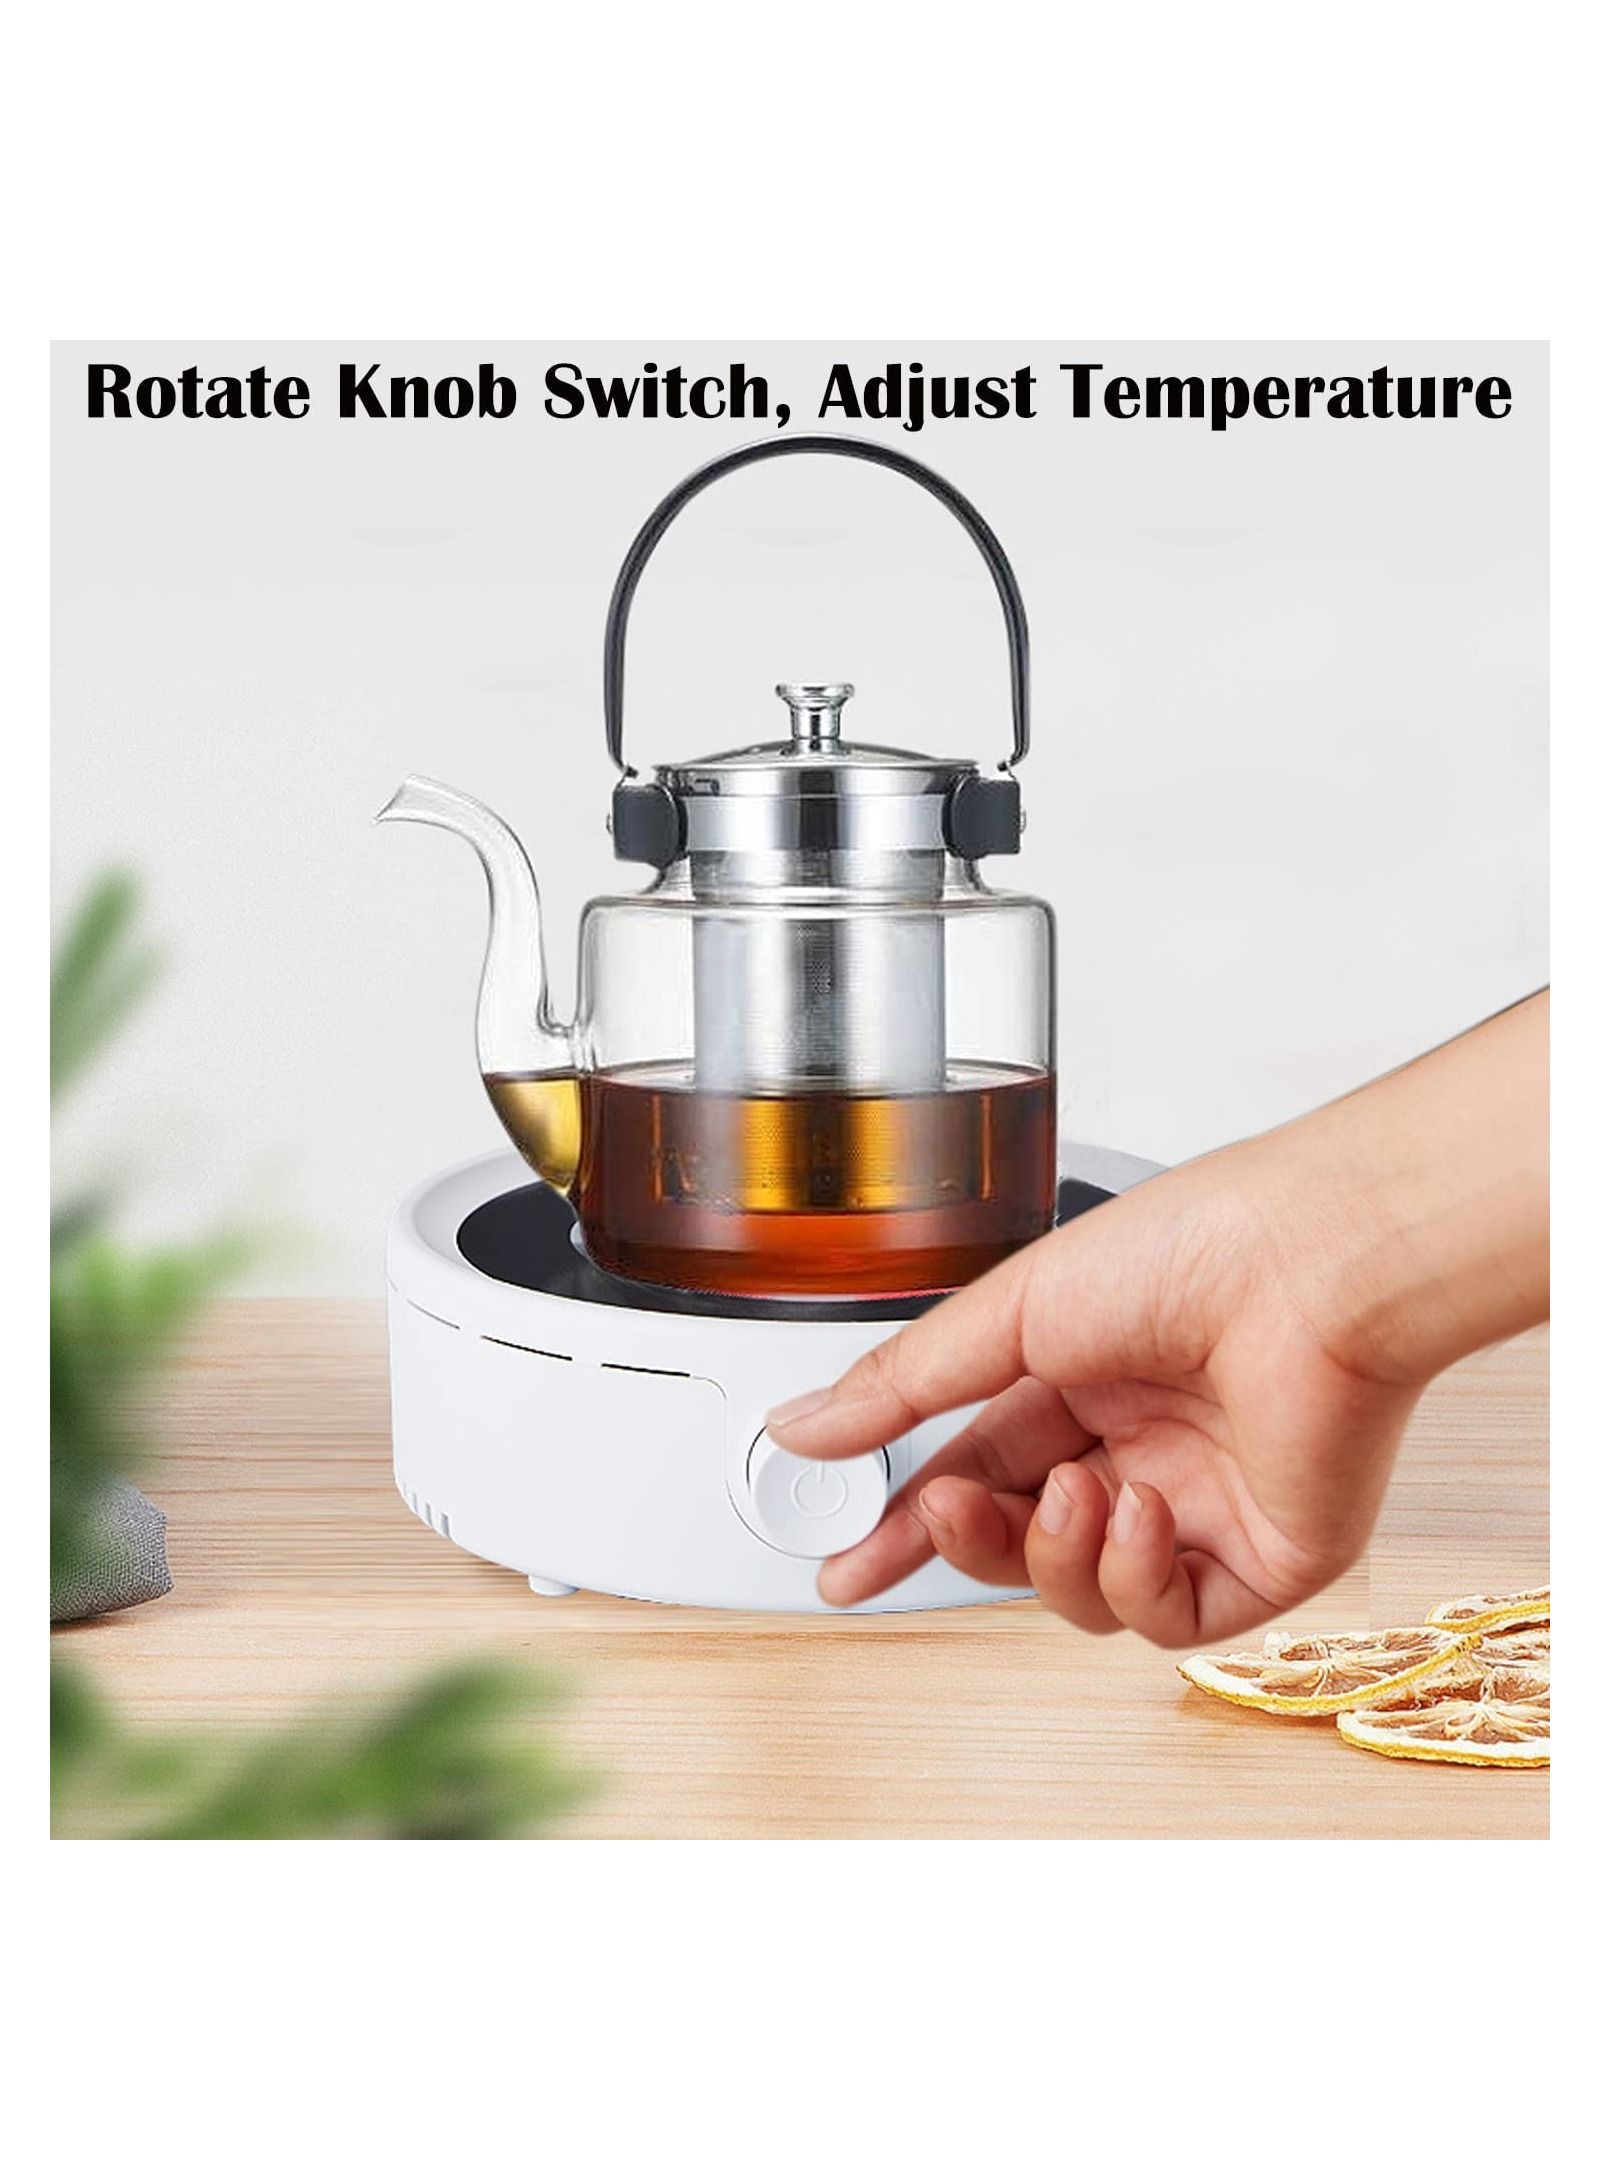 Electric Mini Coffee Pot Warmer with 900ml Teapot,800W Electric Ceramic Stove Round Hot Plate,Heater Stove Countertop Burner for Boiling Water,Tea,Coffee (White) 